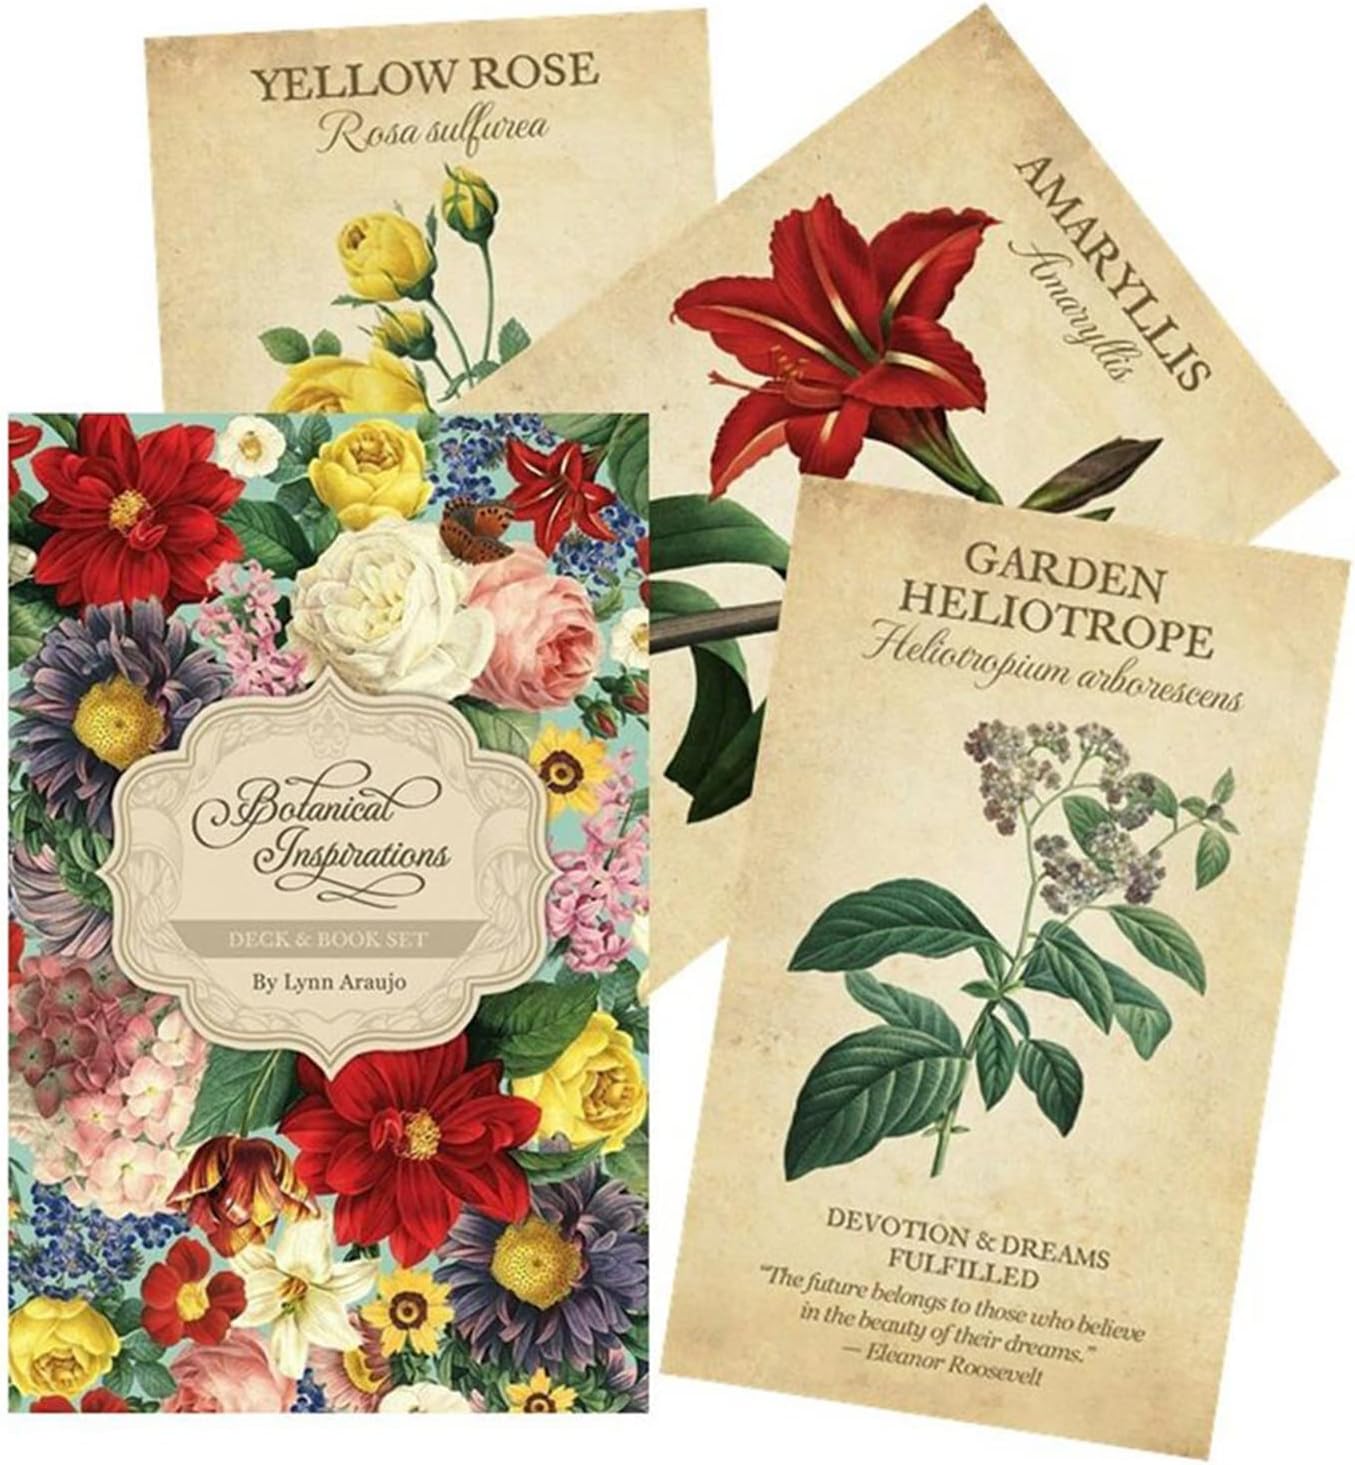 BOTANICAL INSPIRATIONS TAROT Deck - Beautiful Floral Vintage Style Artwork Oracle Cards, Flower Images, Fortune Telling, Victorian Style - Asylum Books